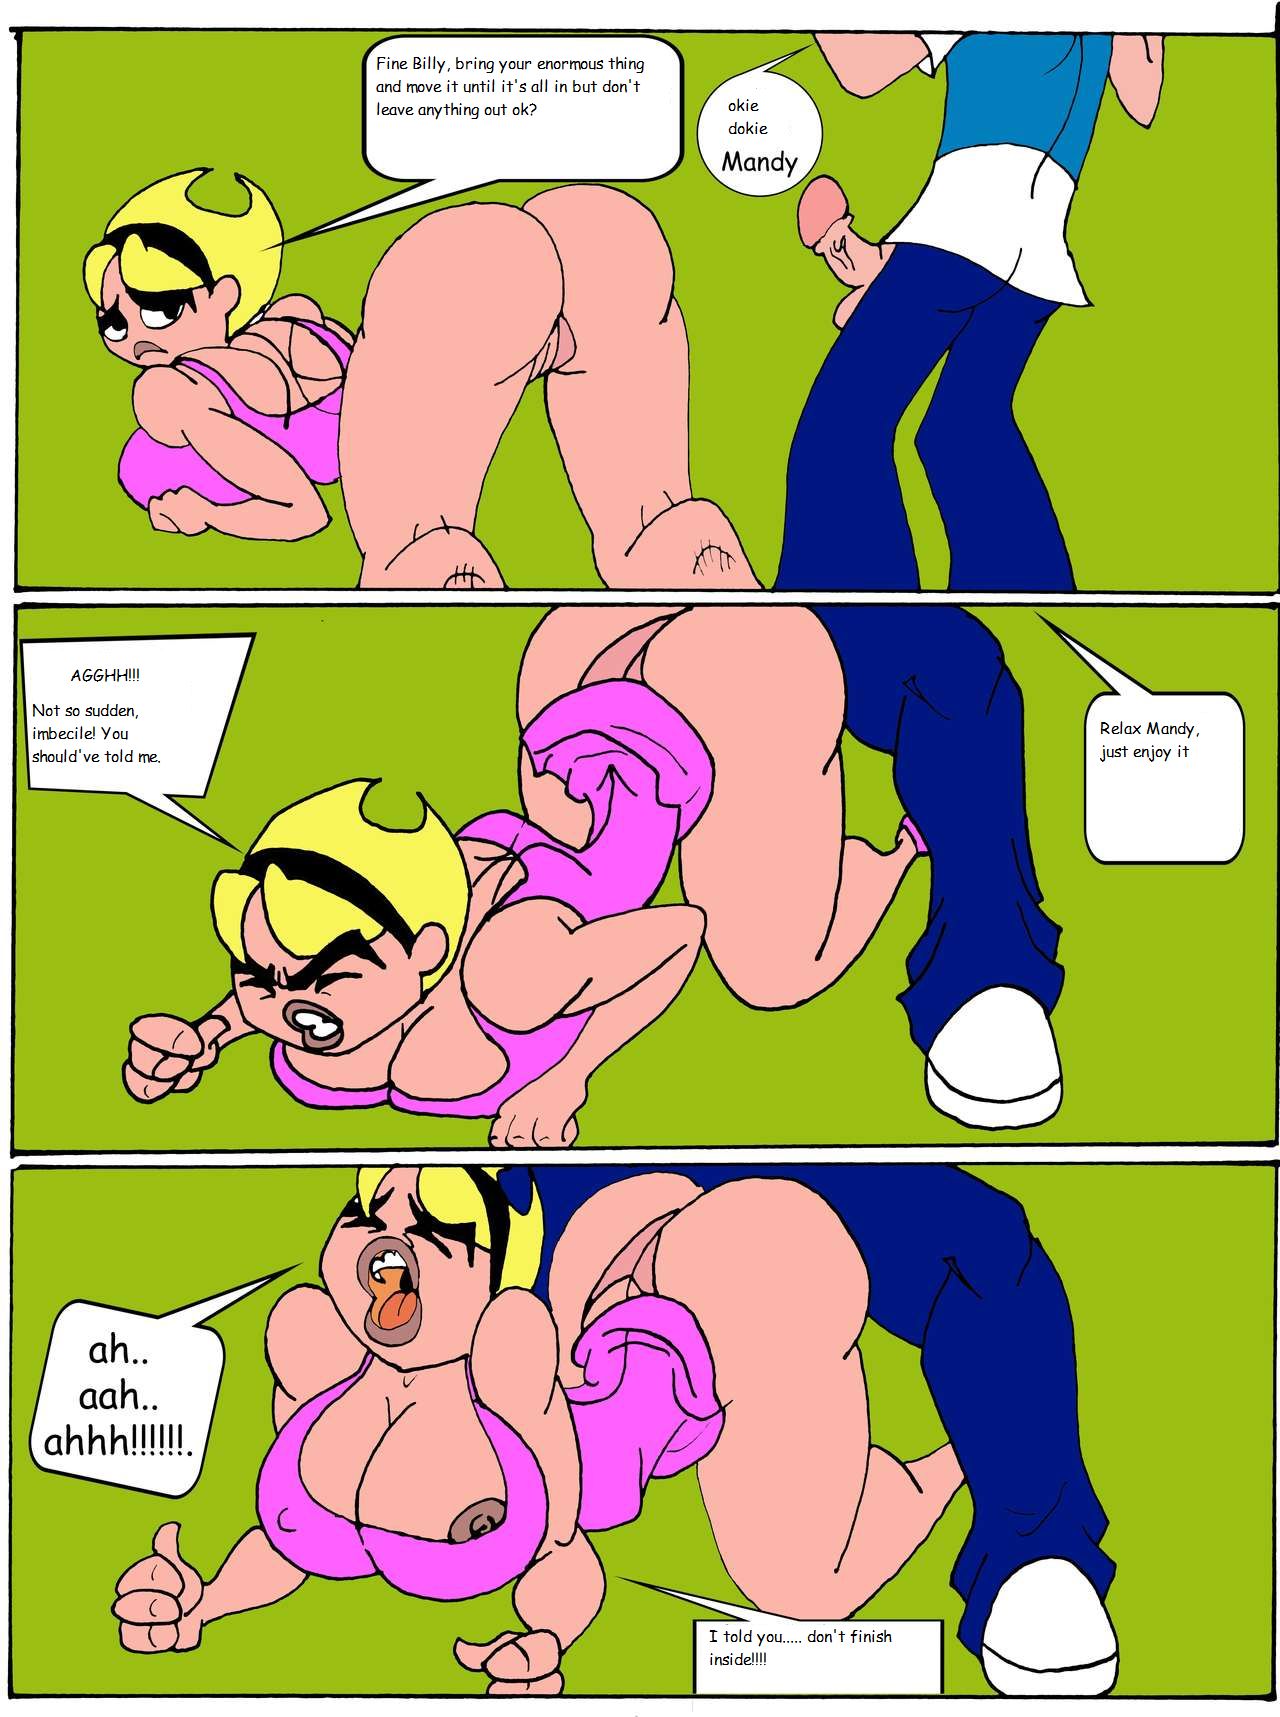 Sexy Adventures of Billy and Mandy.